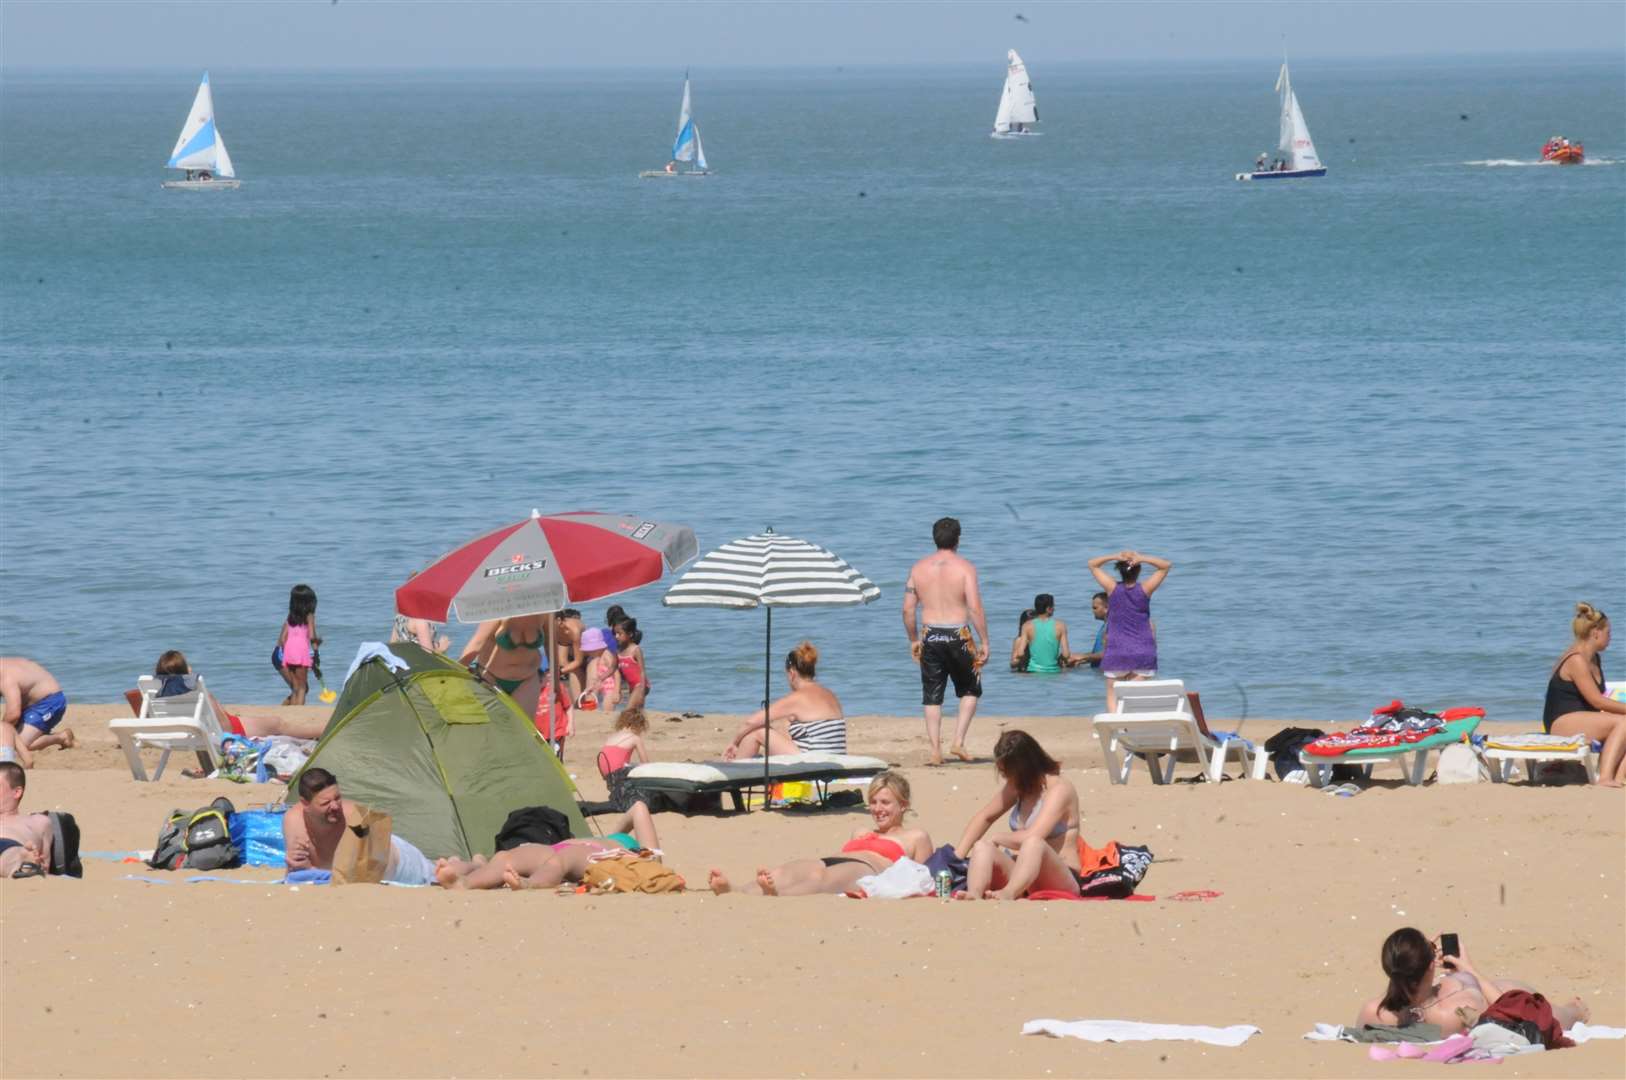 Thanet's beaches are the sunniest in the UK